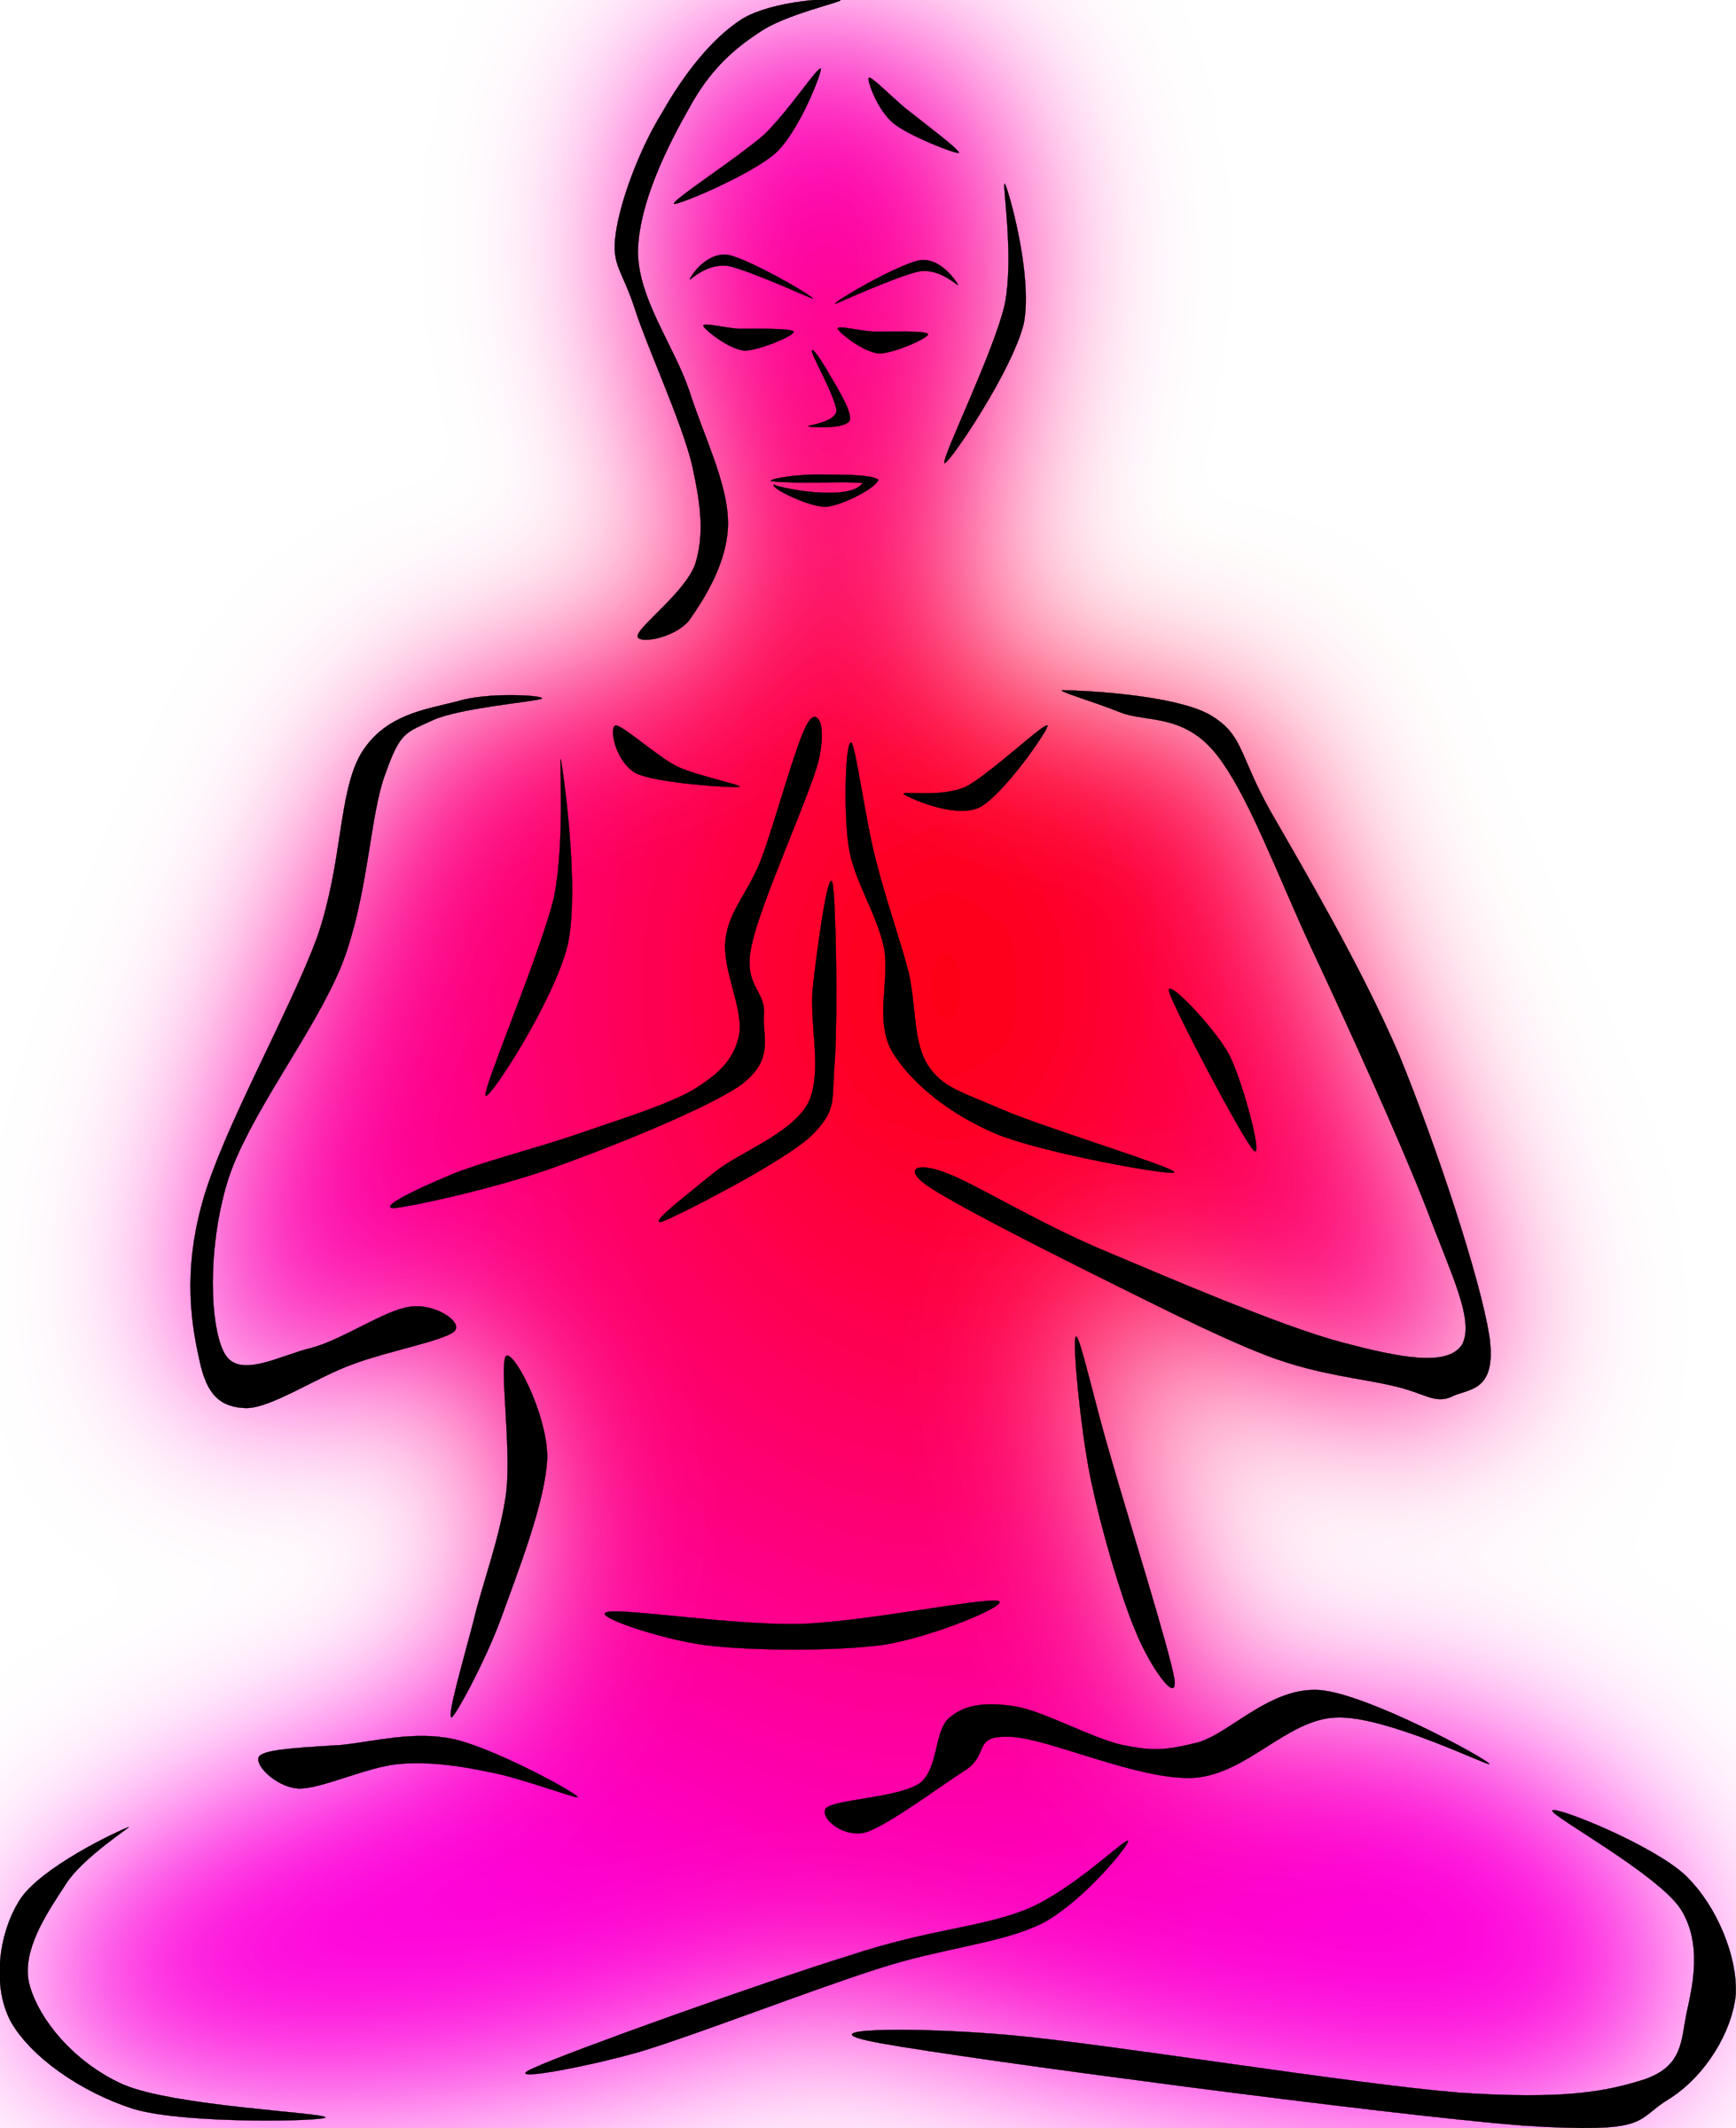 Yoga poses stylized colored. Meditation clipart seer